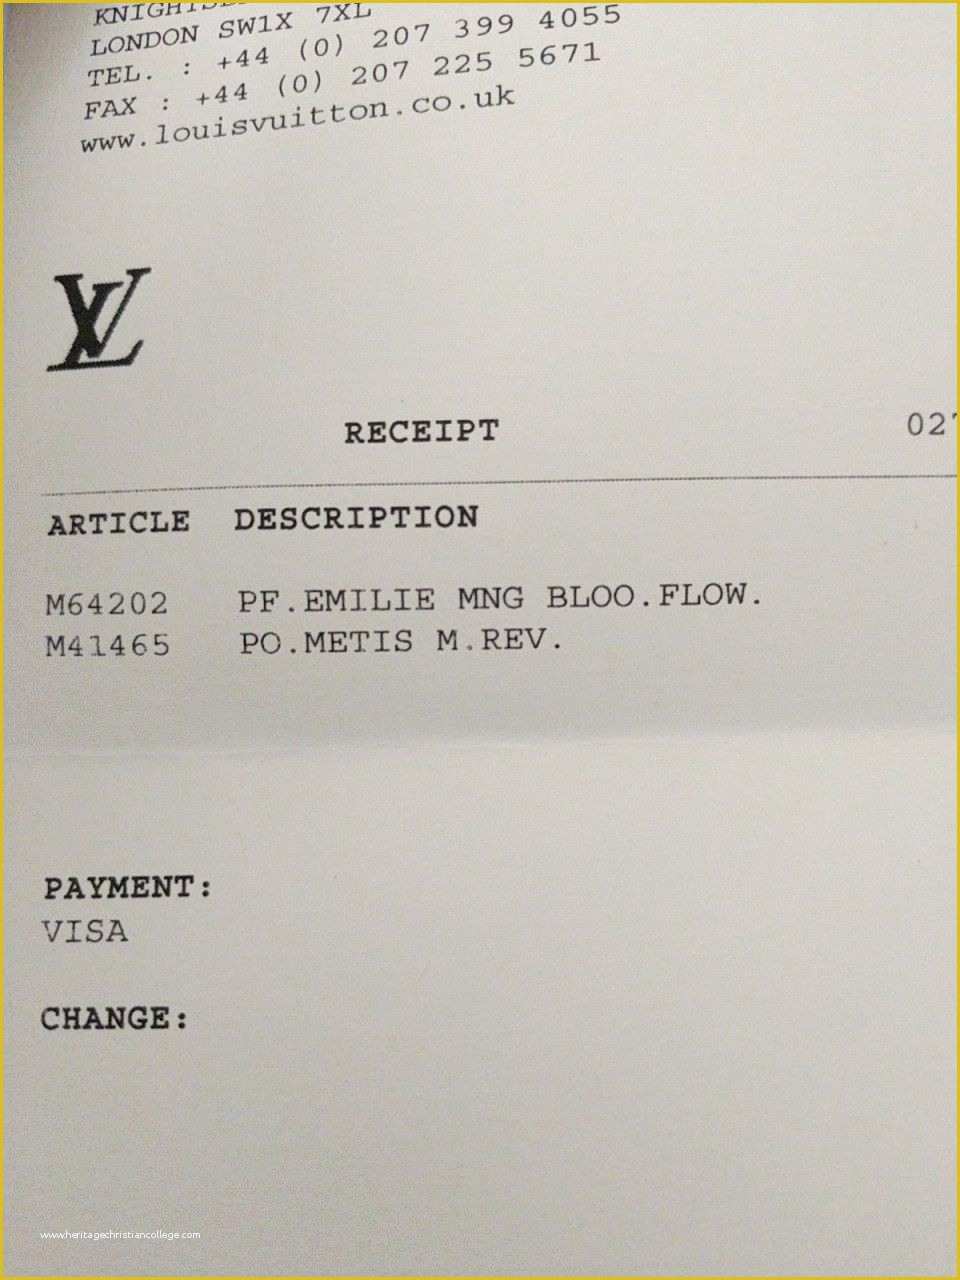 Louis Vuitton Receipt Template Free Of Louis Vuitton Letters Template – Jewelry ...